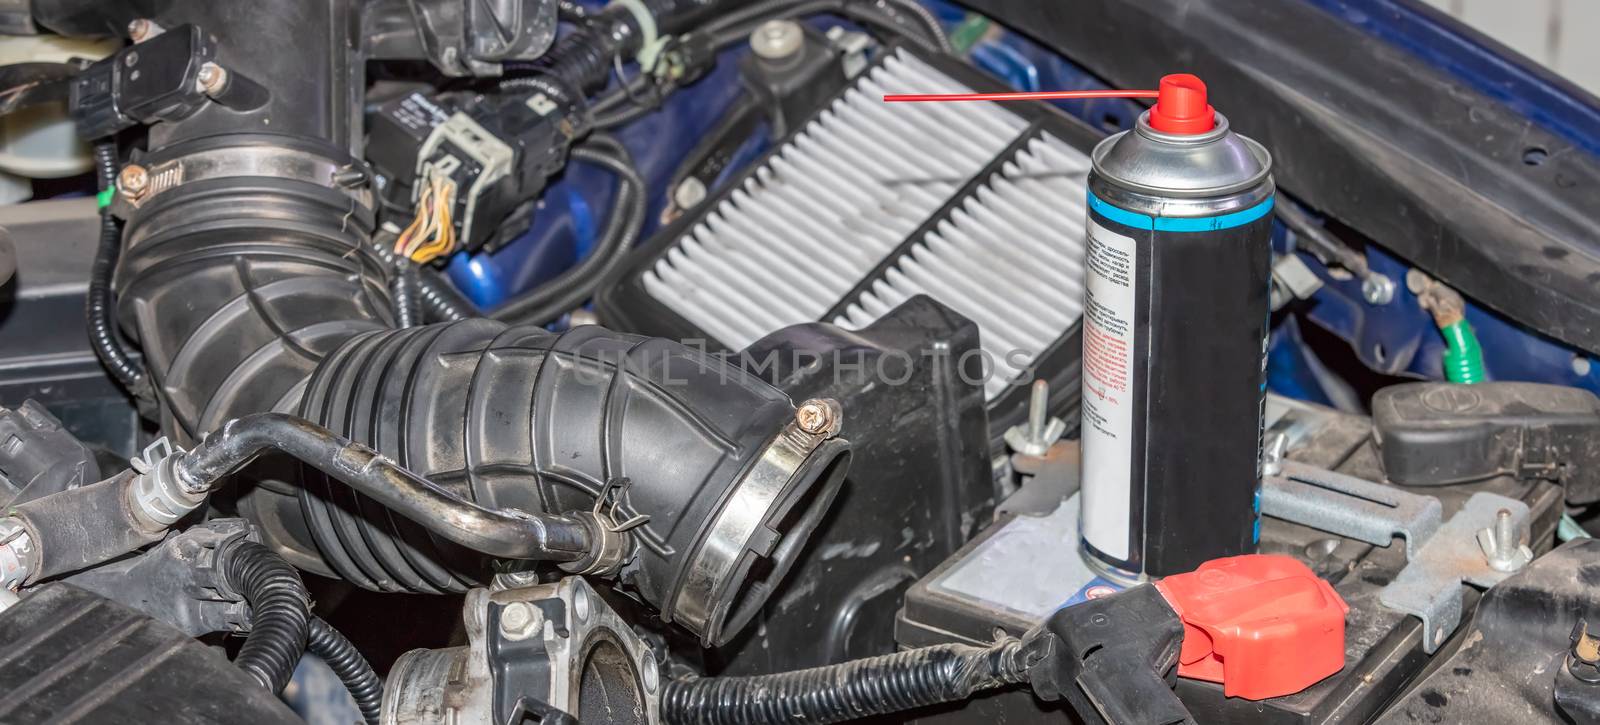 Automotive engine air intake tube, filter and can with cleaning liquid by DamantisZ